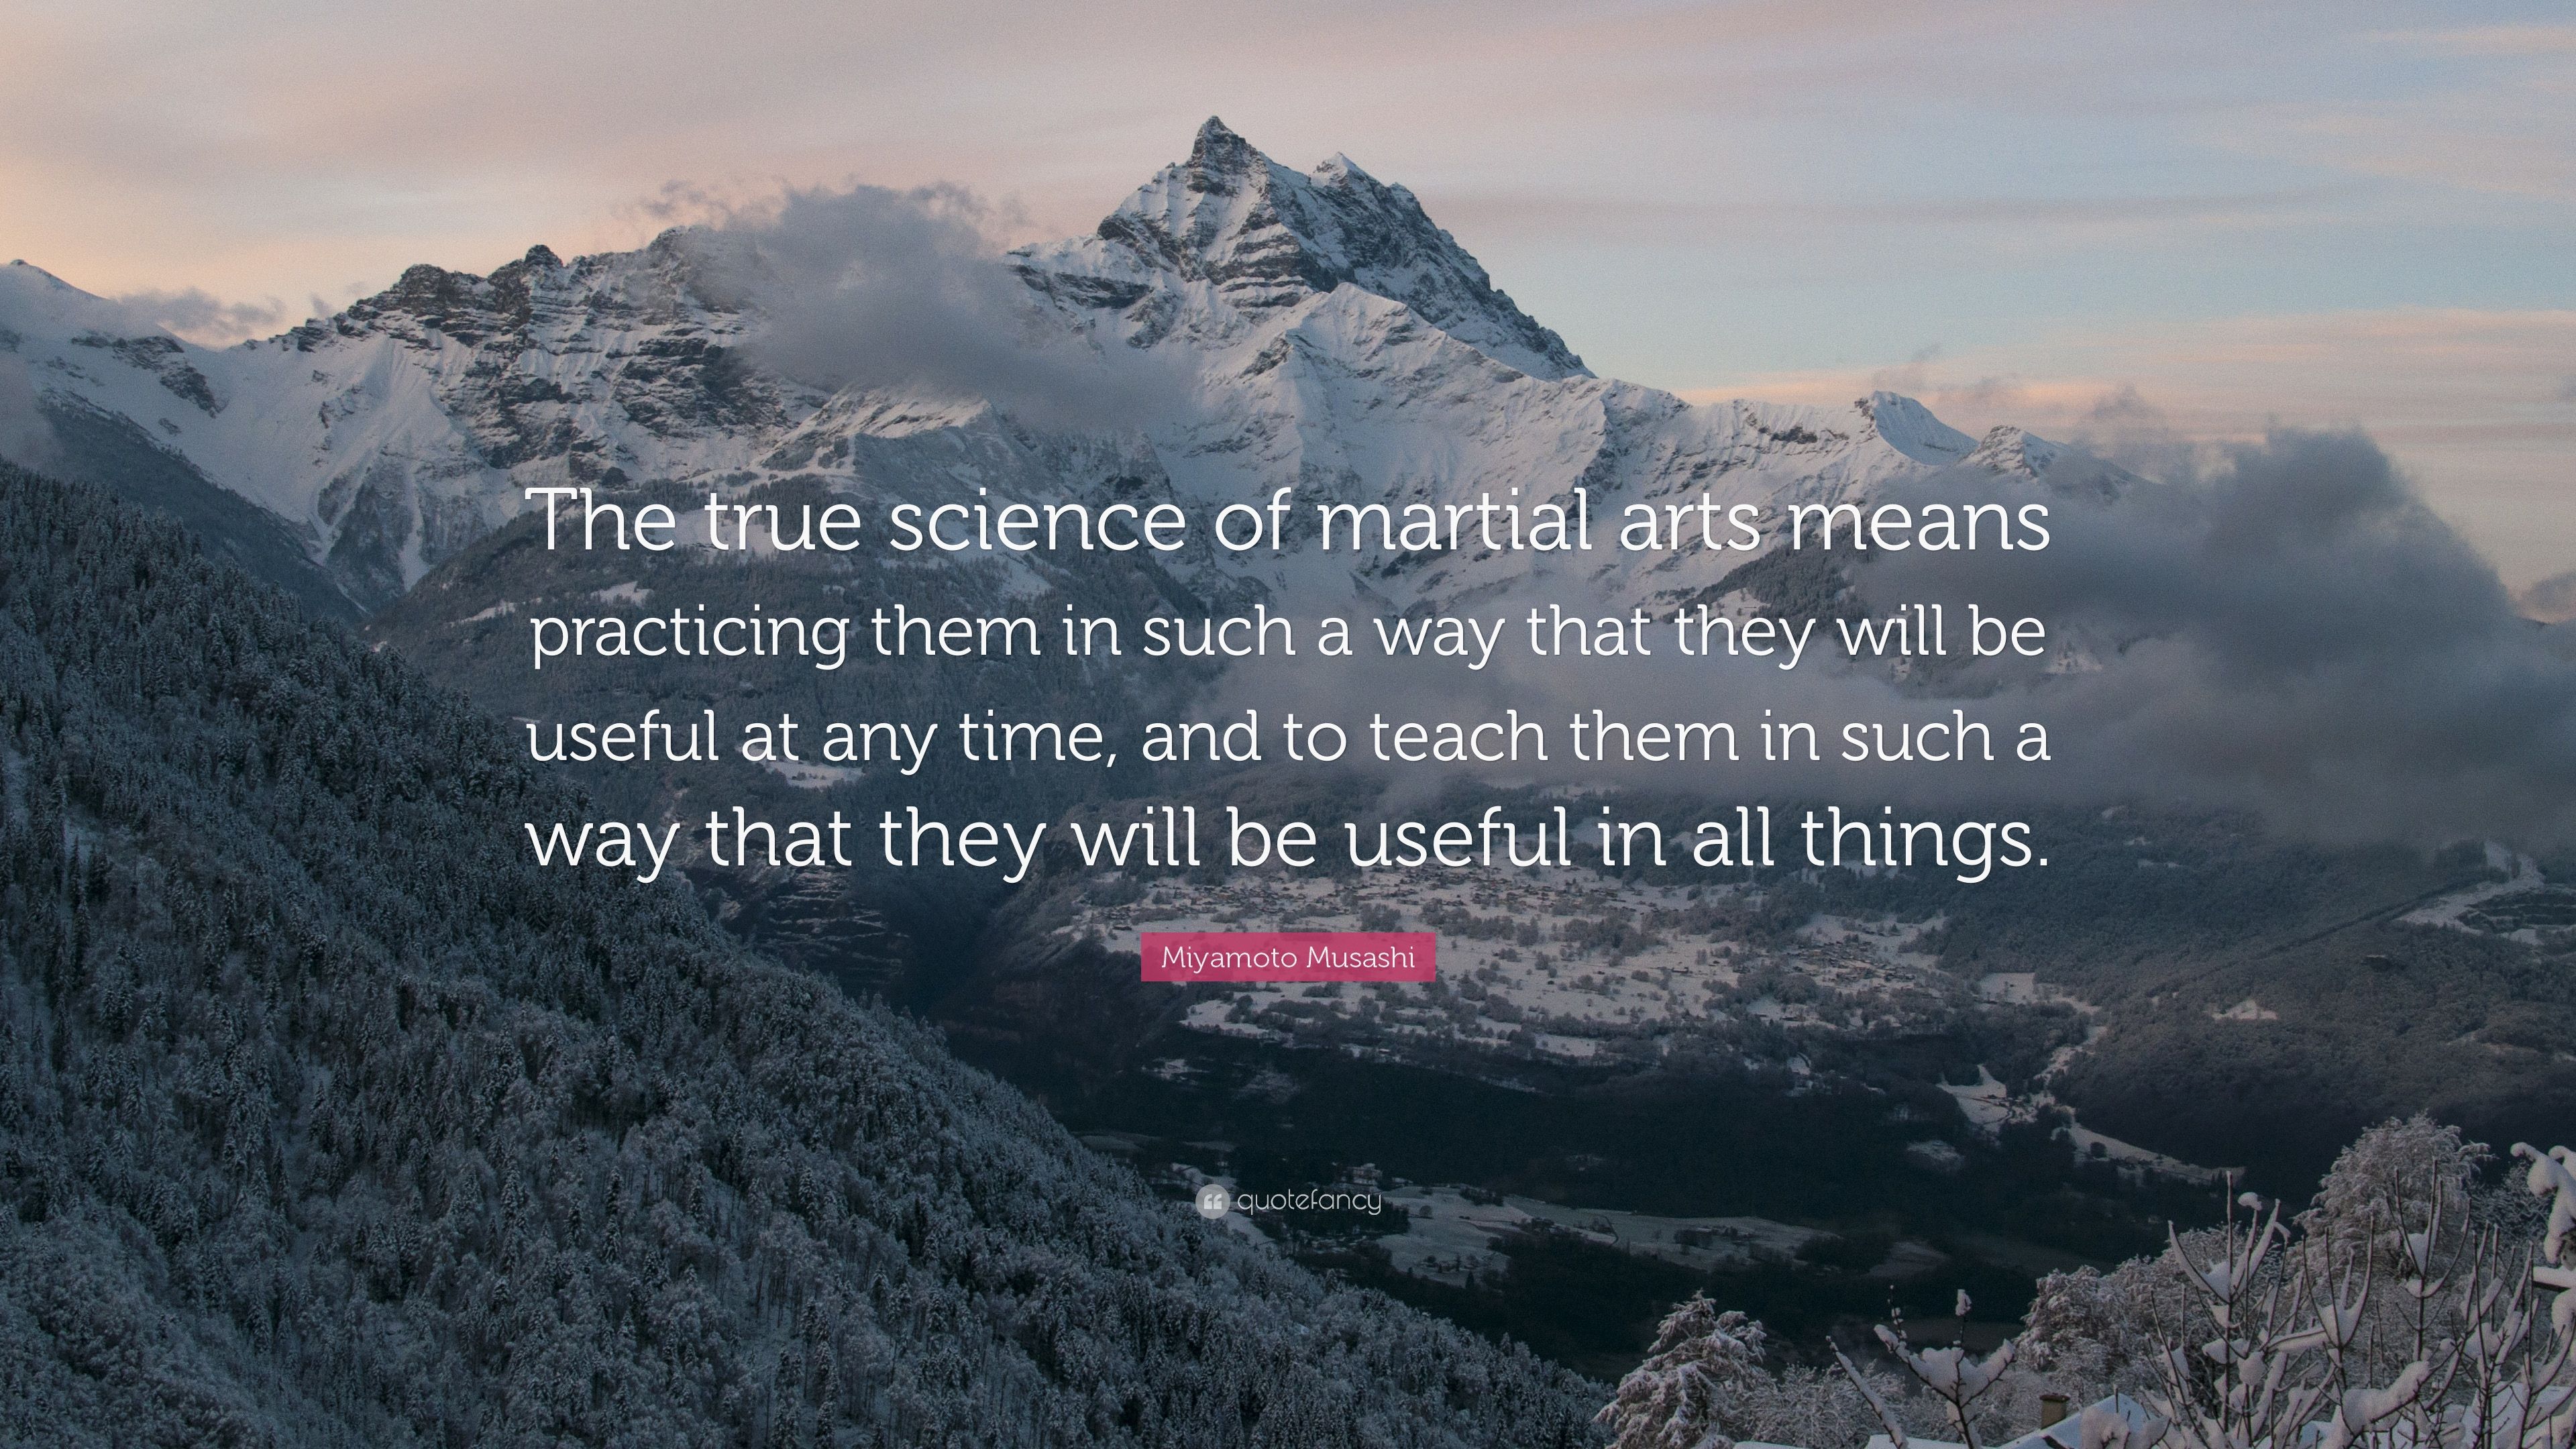 Miyamoto Musashi Quote: “The true science of martial arts means